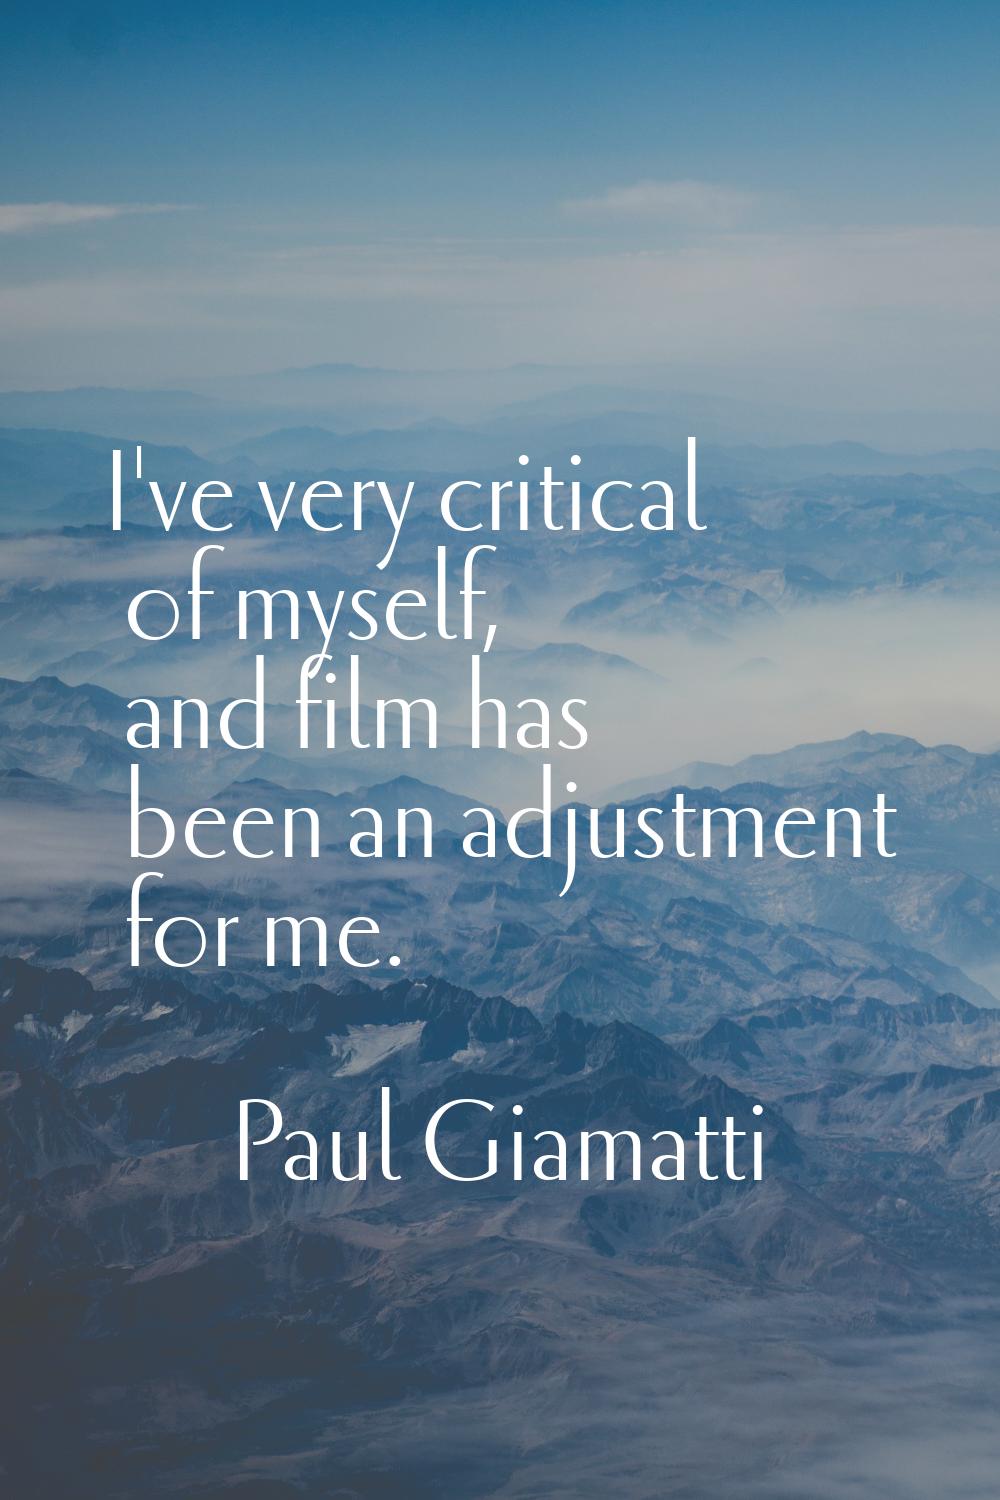 I've very critical of myself, and film has been an adjustment for me.